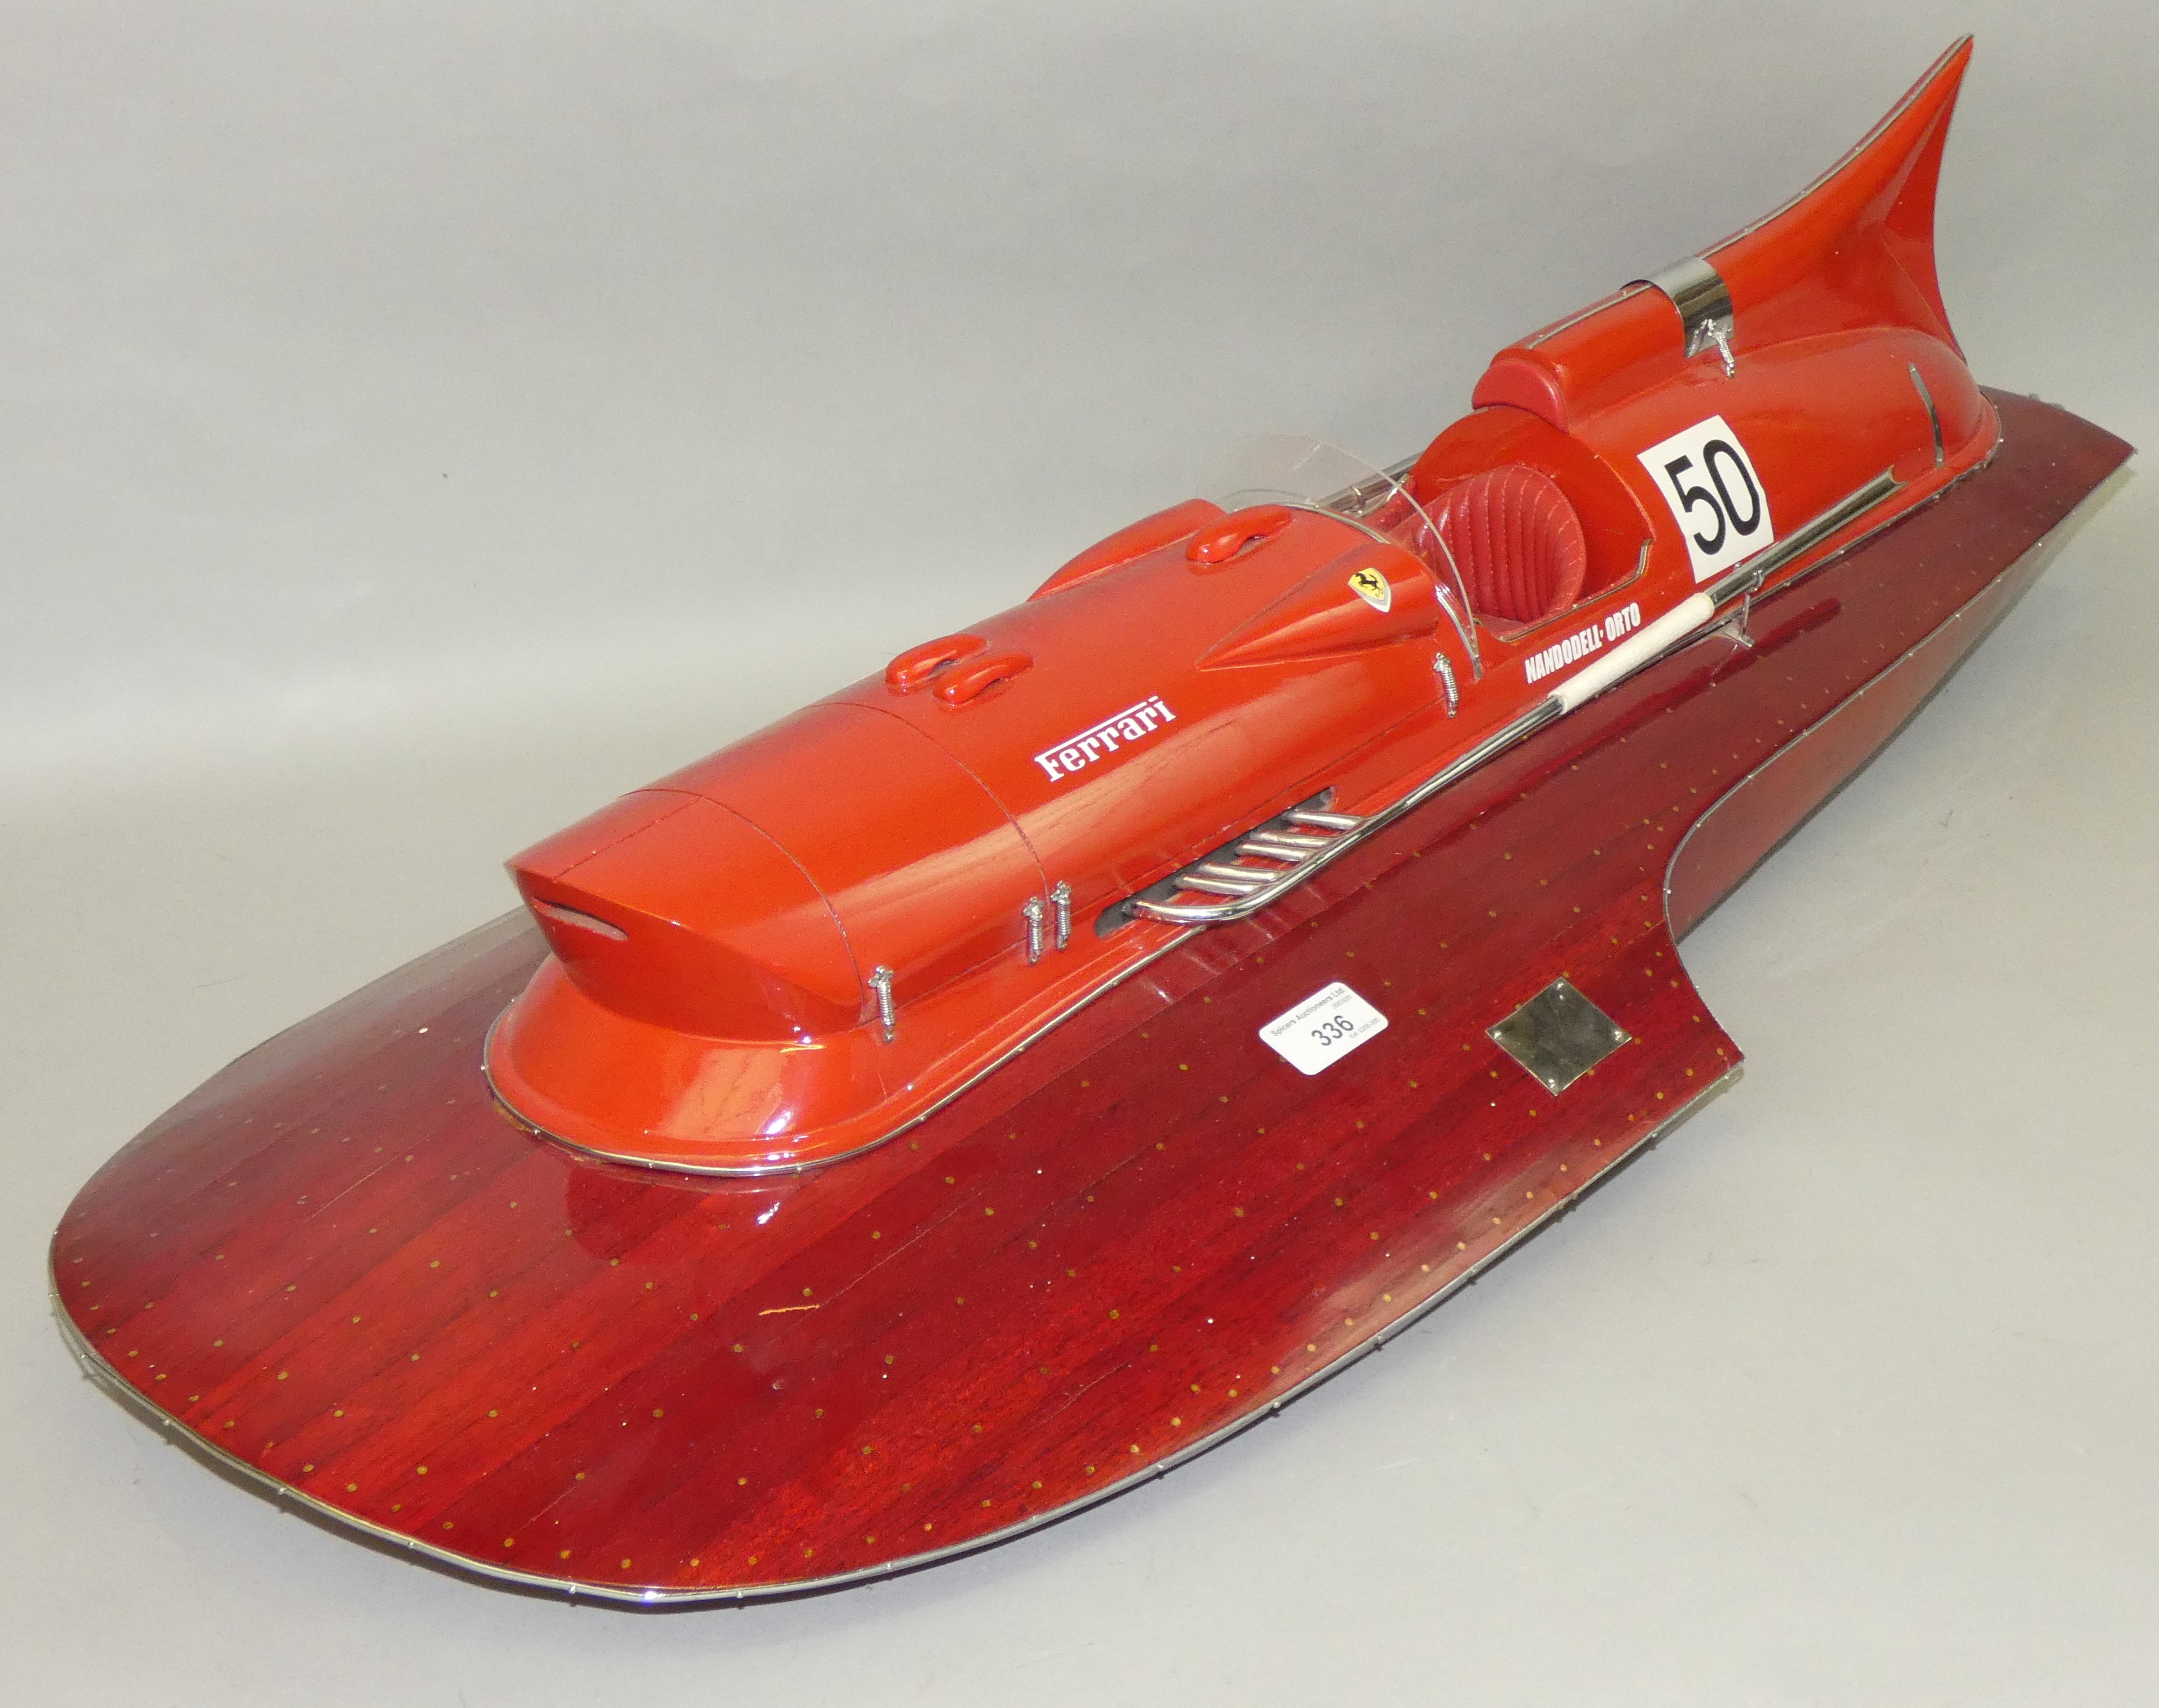 A model of Castoldi's 1953 Ferrari Hydroplane, with planked wooden hull and padded leather set.